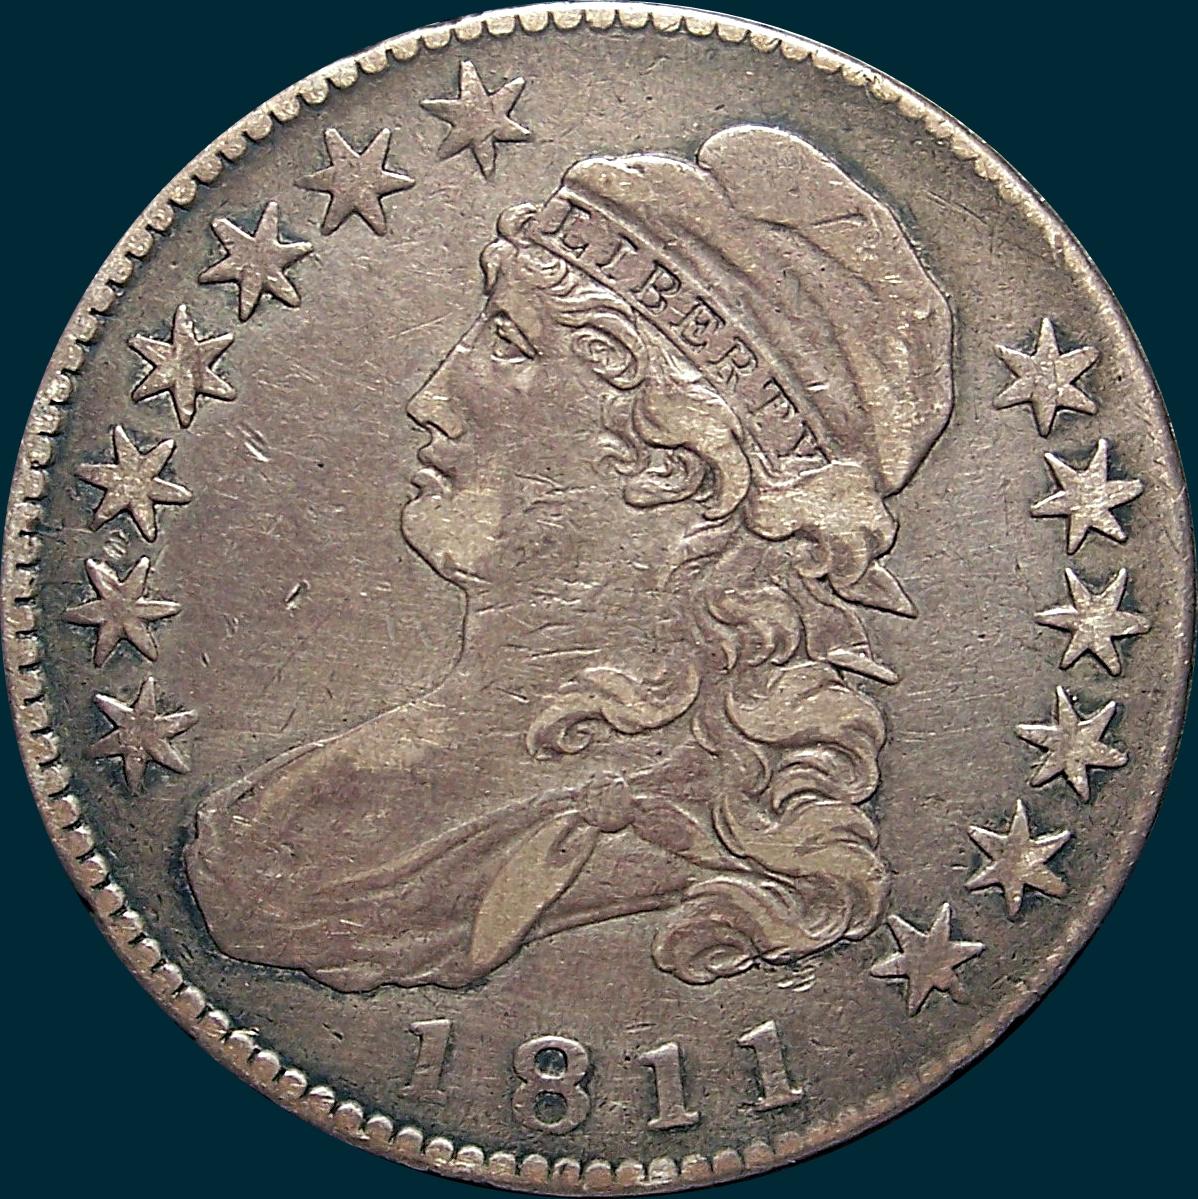 1811 O-104, Large 8, Capped bust half dollar